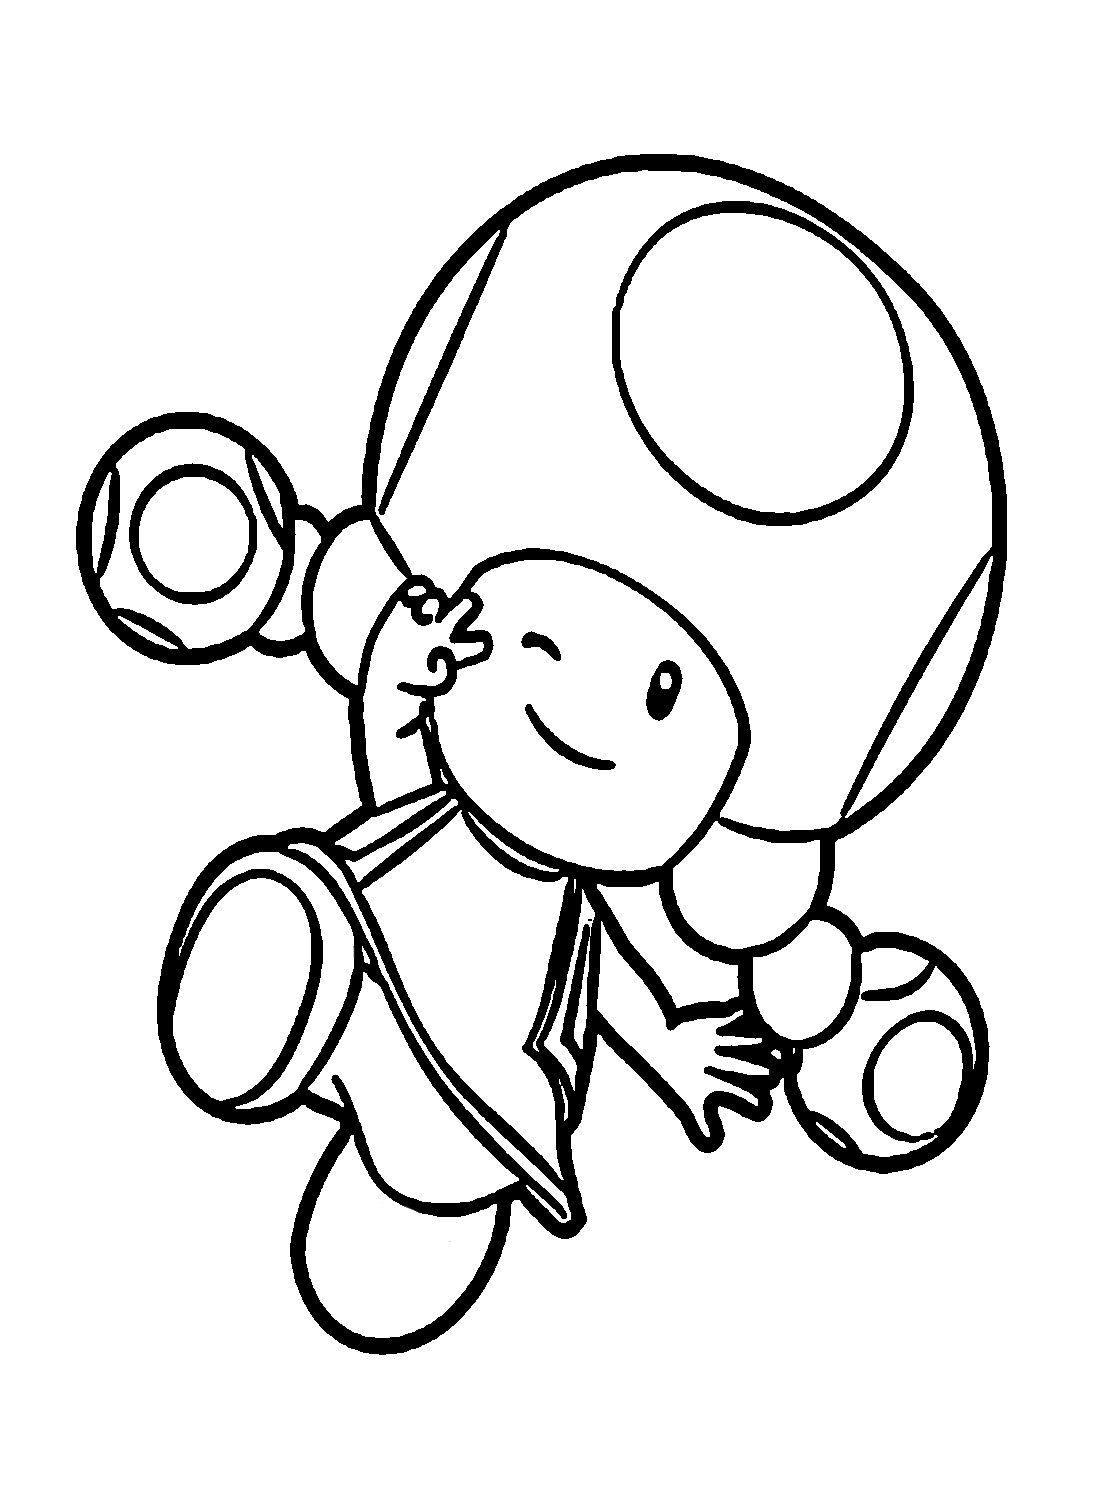 Toadette From Mario Page Coloring Pages My Xxx Hot Girl 